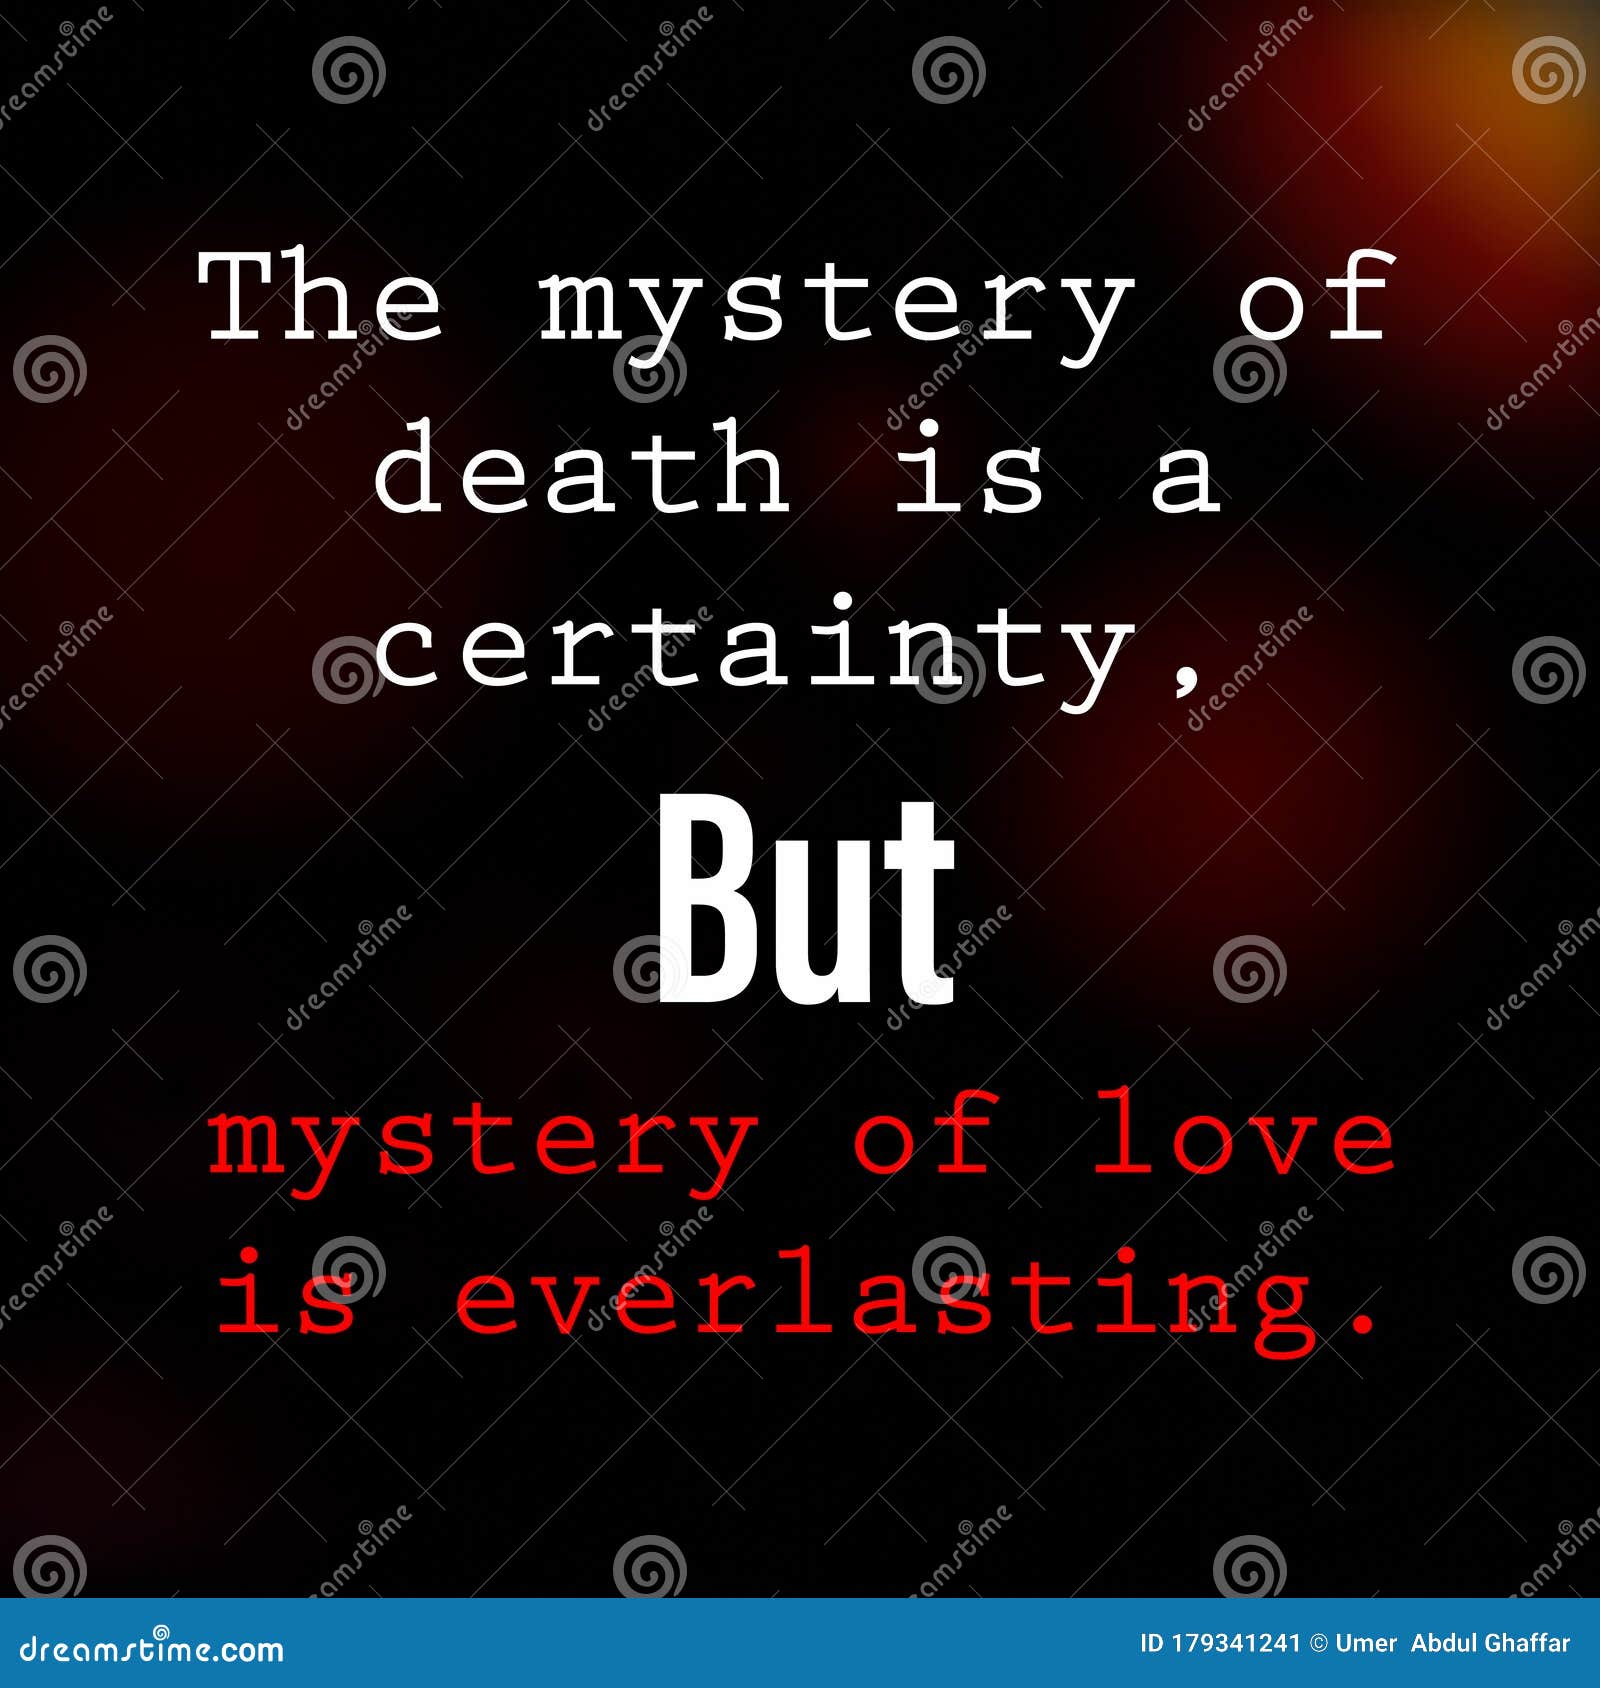 the mystery of death is a certainty, but mystery of love is everlasting. death and love quote